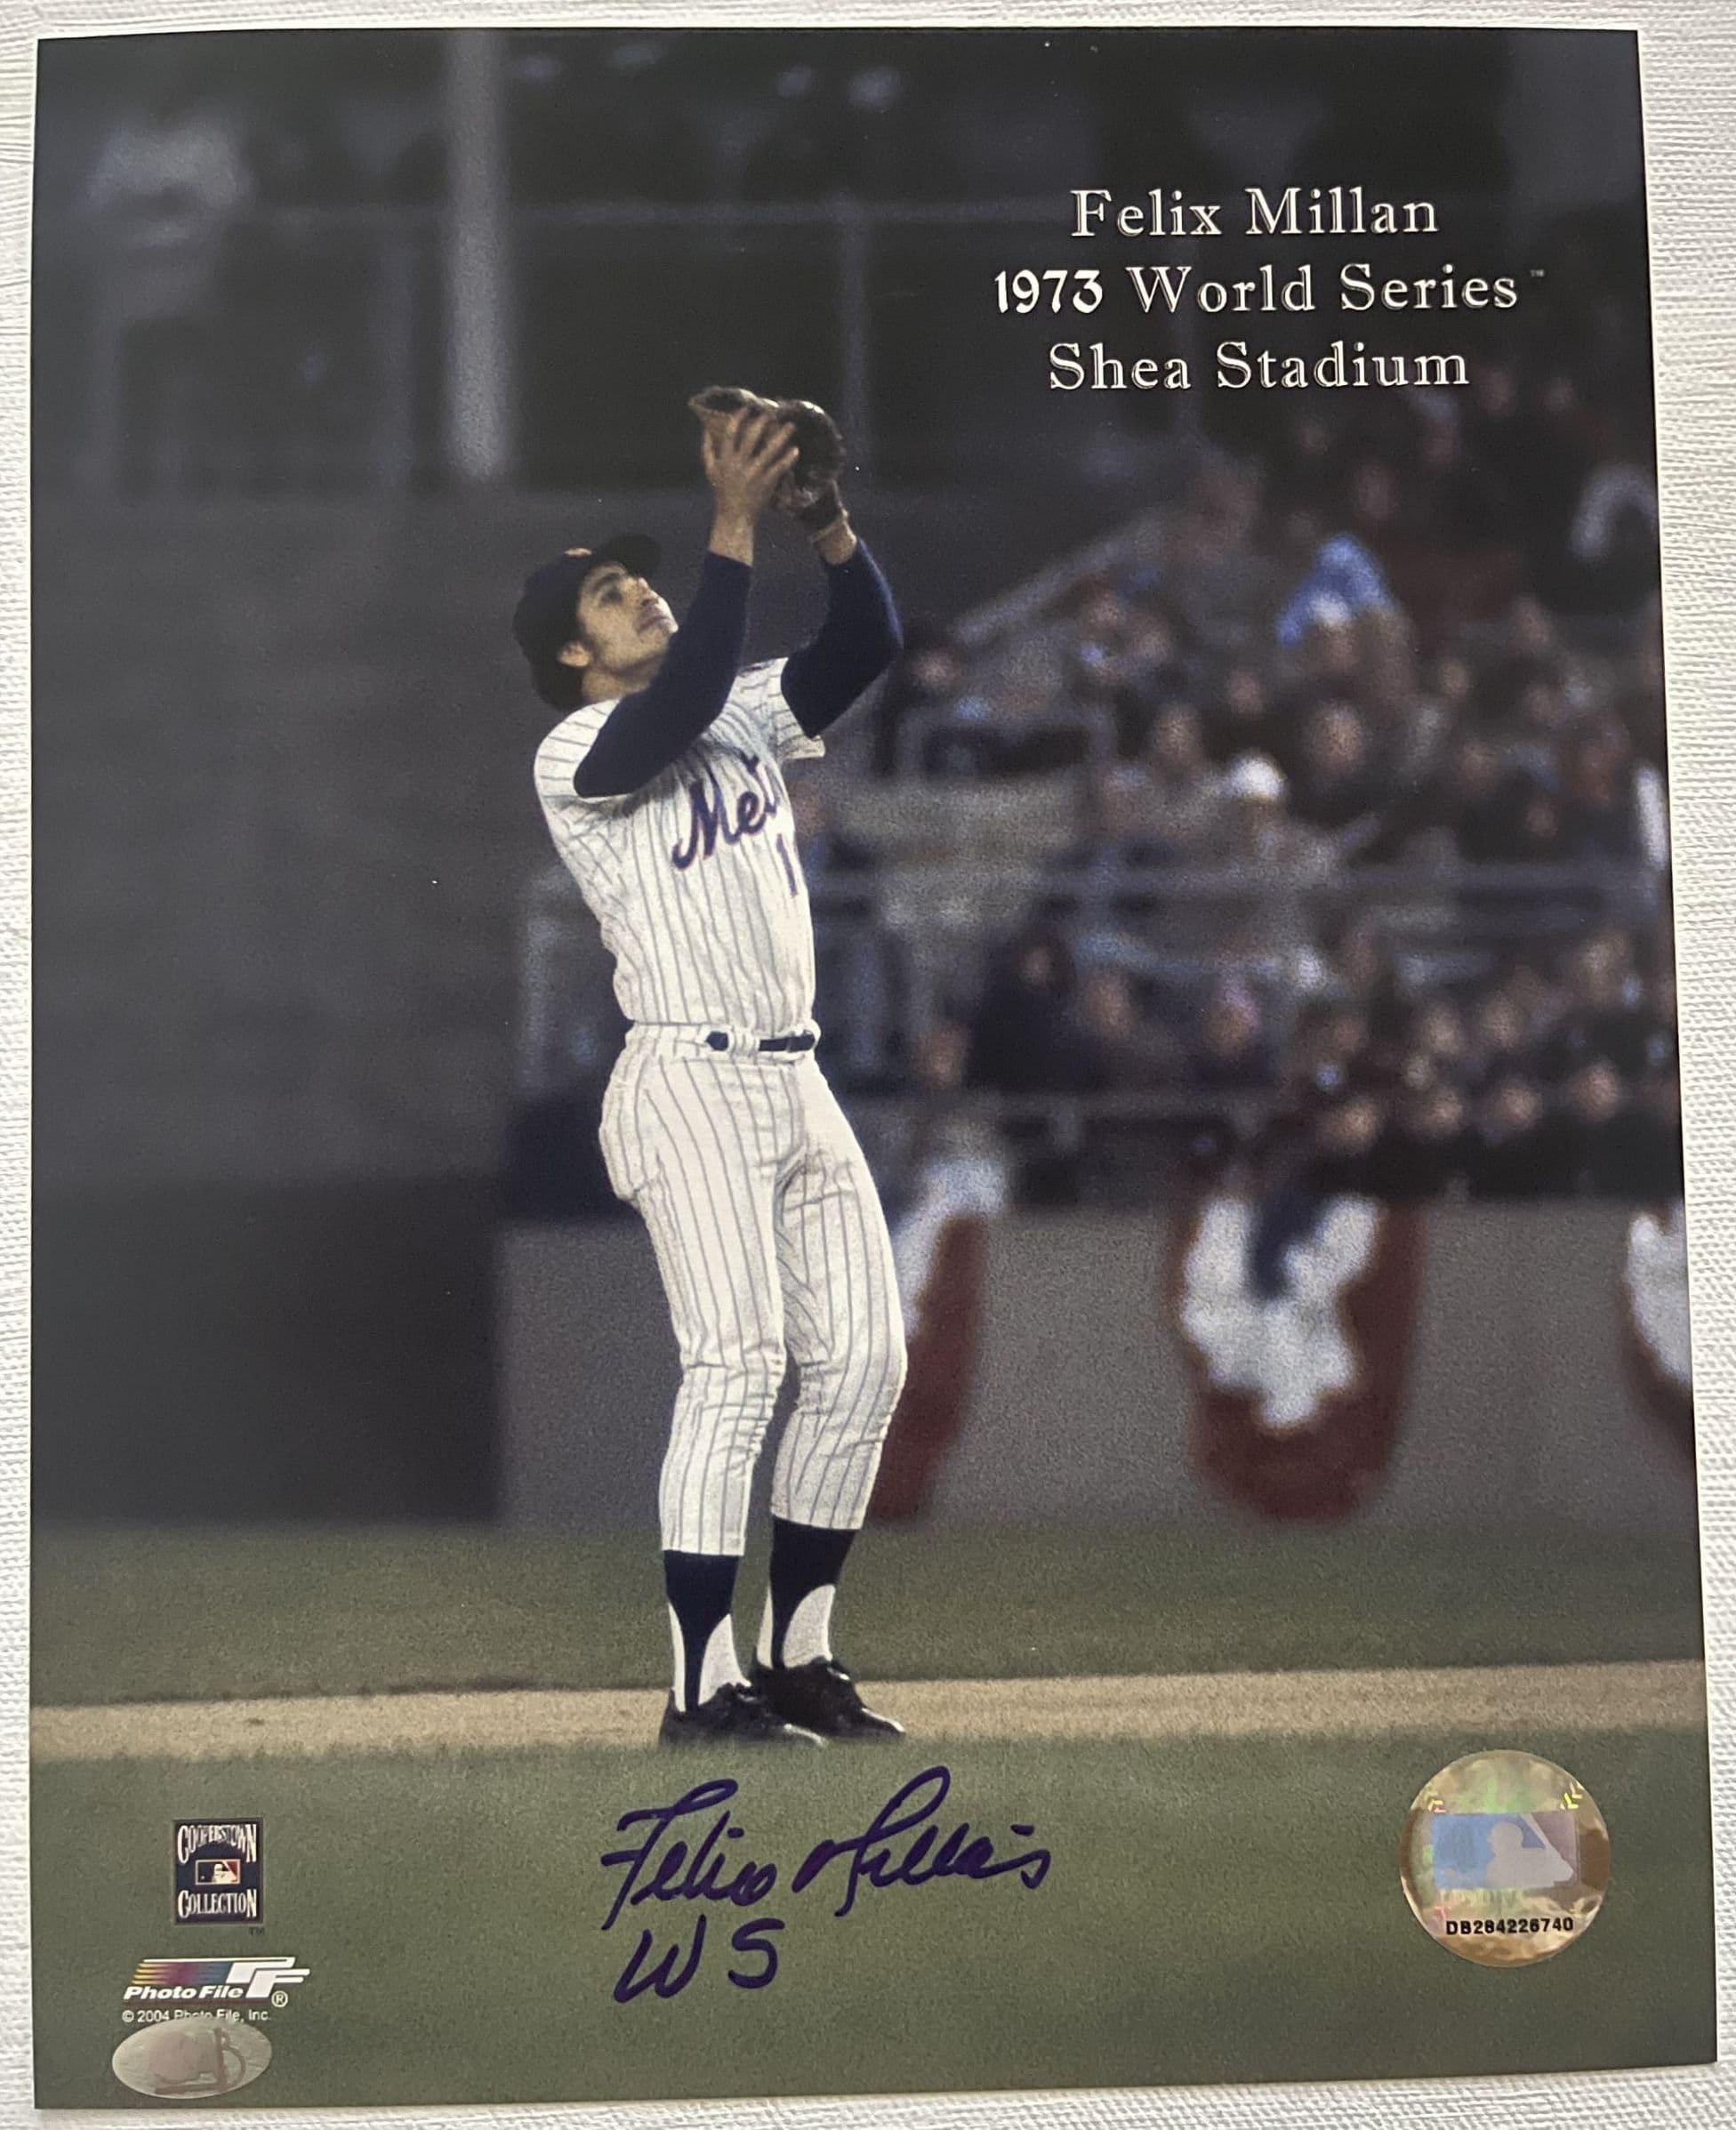 Felix Millan Signed Autographed 1973 World Series Glossy 8x10 